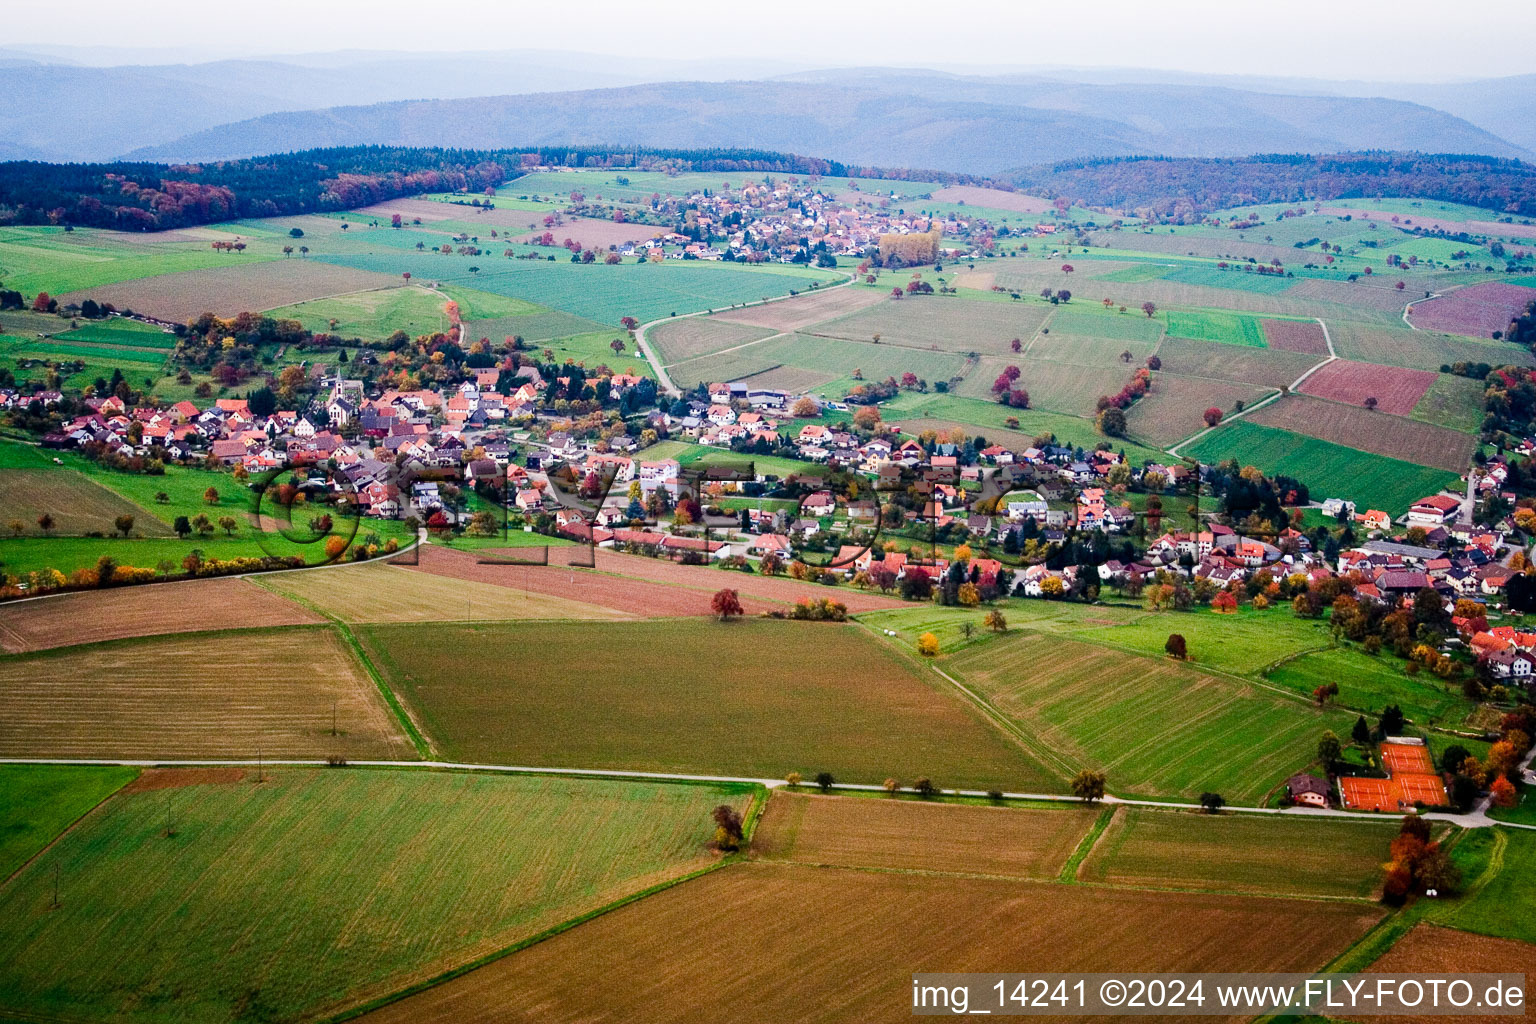 Village - view on the edge of agricultural fields and farmland in the district Haag in Schoenbrunn in the state Baden-Wurttemberg, Germany